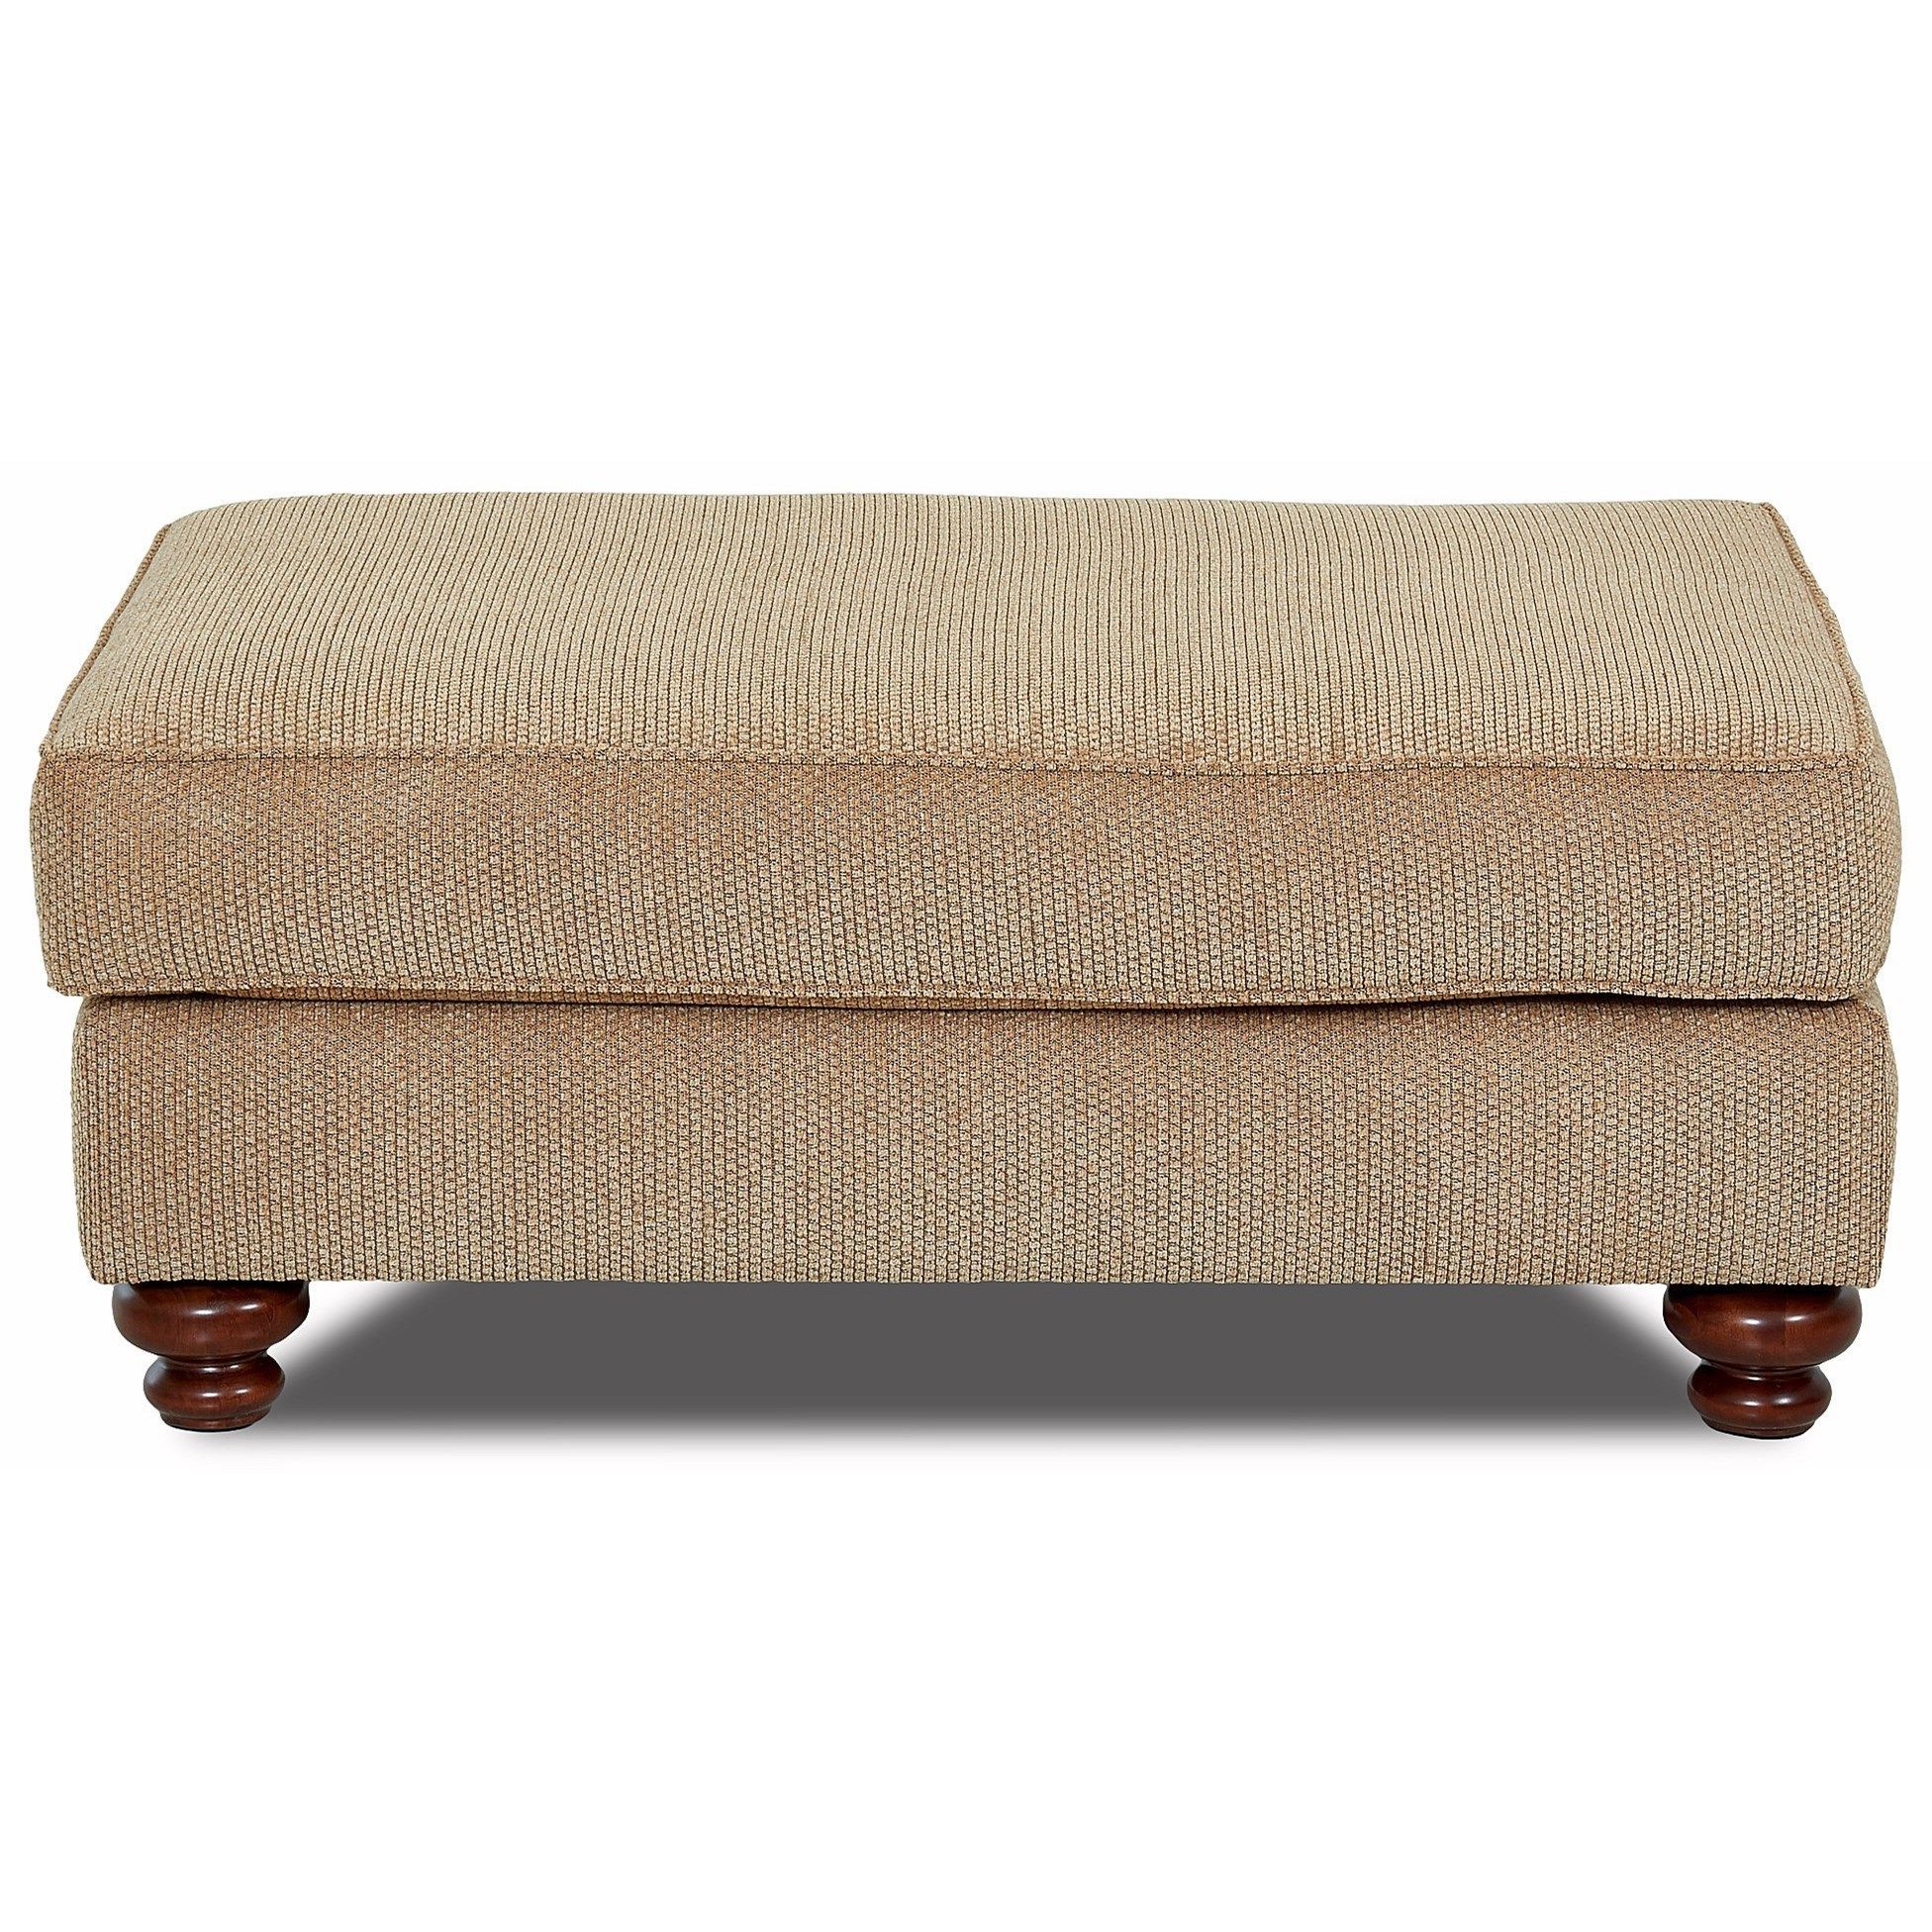 Wooden Legs Ottomans In Recent Declan Traditional Oversized Ottoman With Turned Wood Legsklaussner (View 1 of 10)